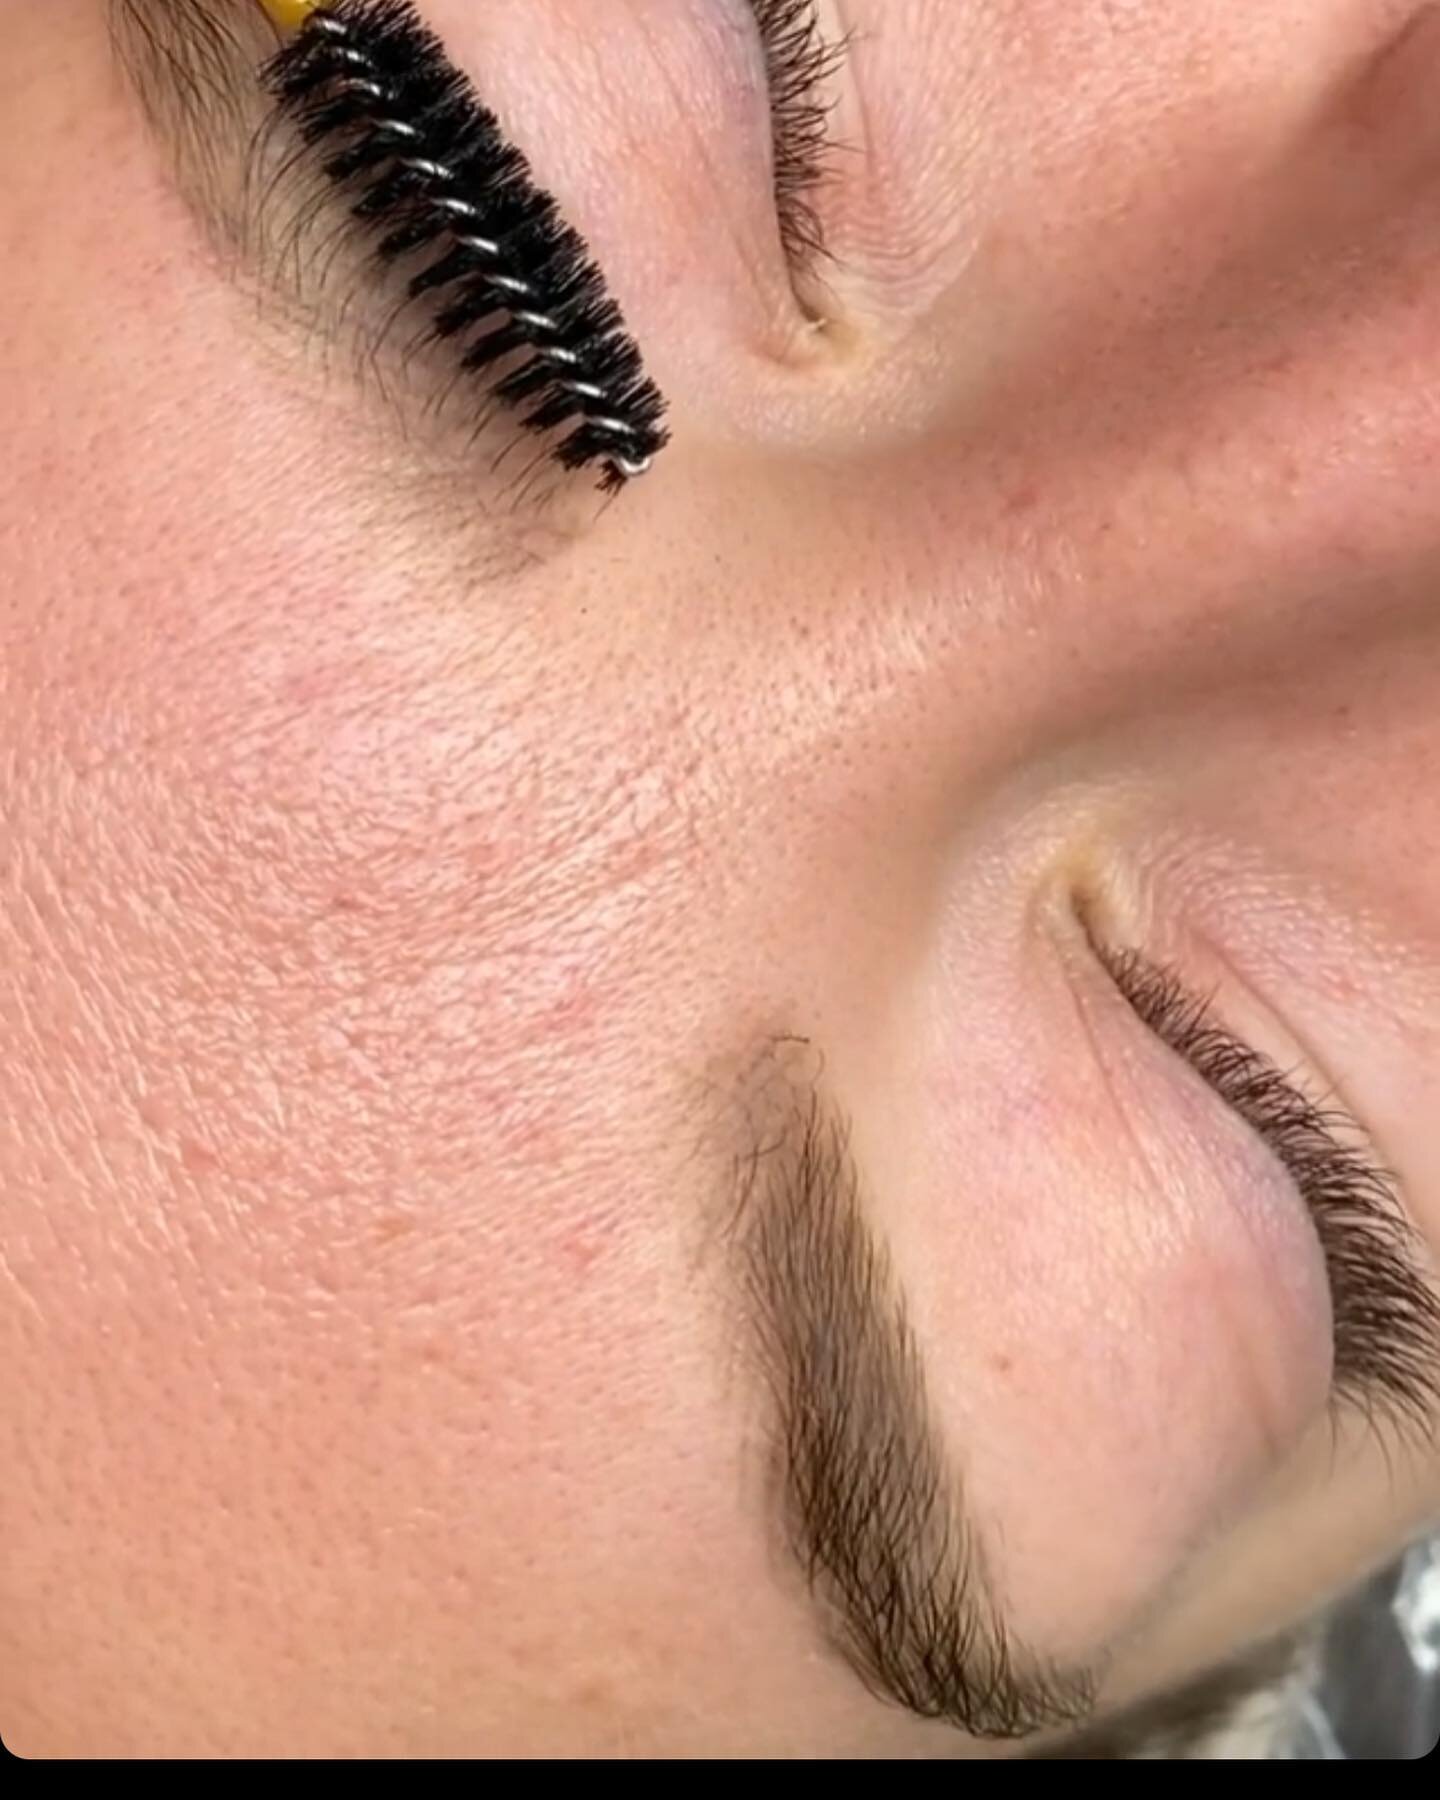 Let&rsquo;s talk about Touch Ups! These brows here are healed after 2 years.
.
Microblading should not be done every single year. Very few people will need a touch up at 1 year. Most will be more like 2-3 years. If you had a touch up at 1 year, then 